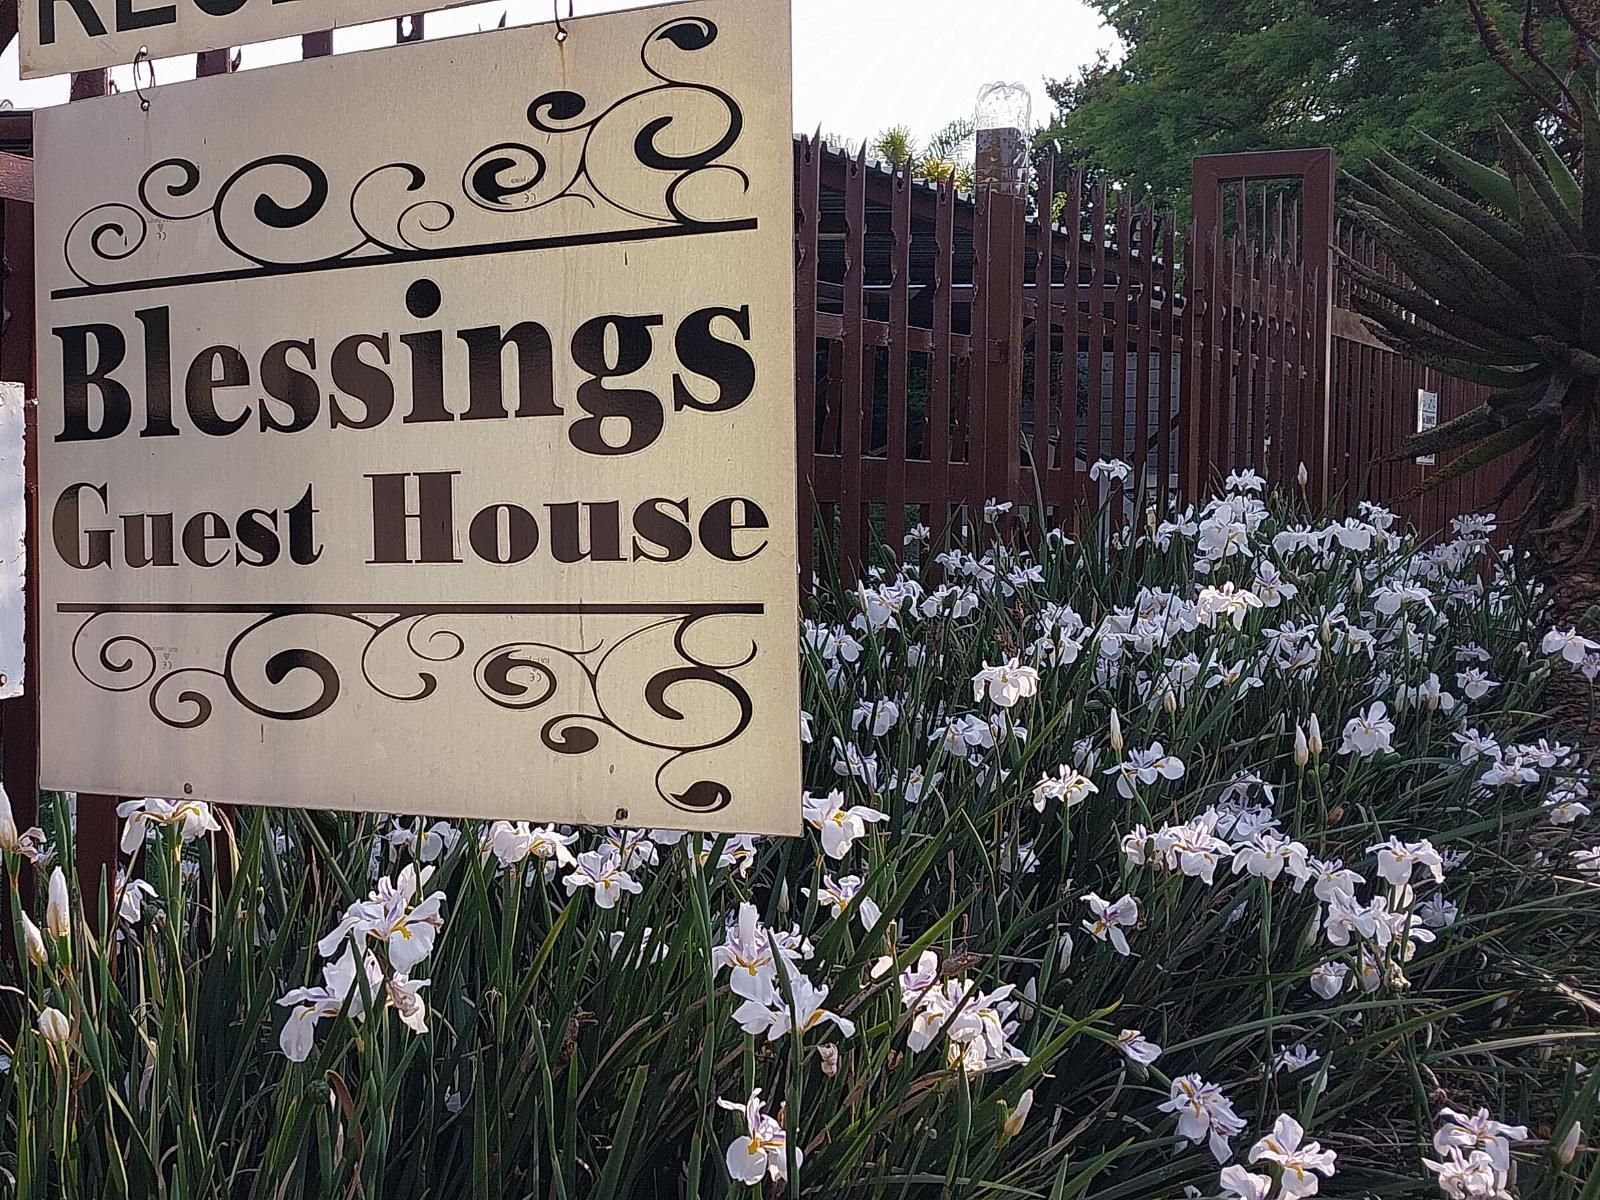 Blessings Guest House Hutten Heights Newcastle Kwazulu Natal South Africa Flower, Plant, Nature, House, Building, Architecture, Sign, Garden